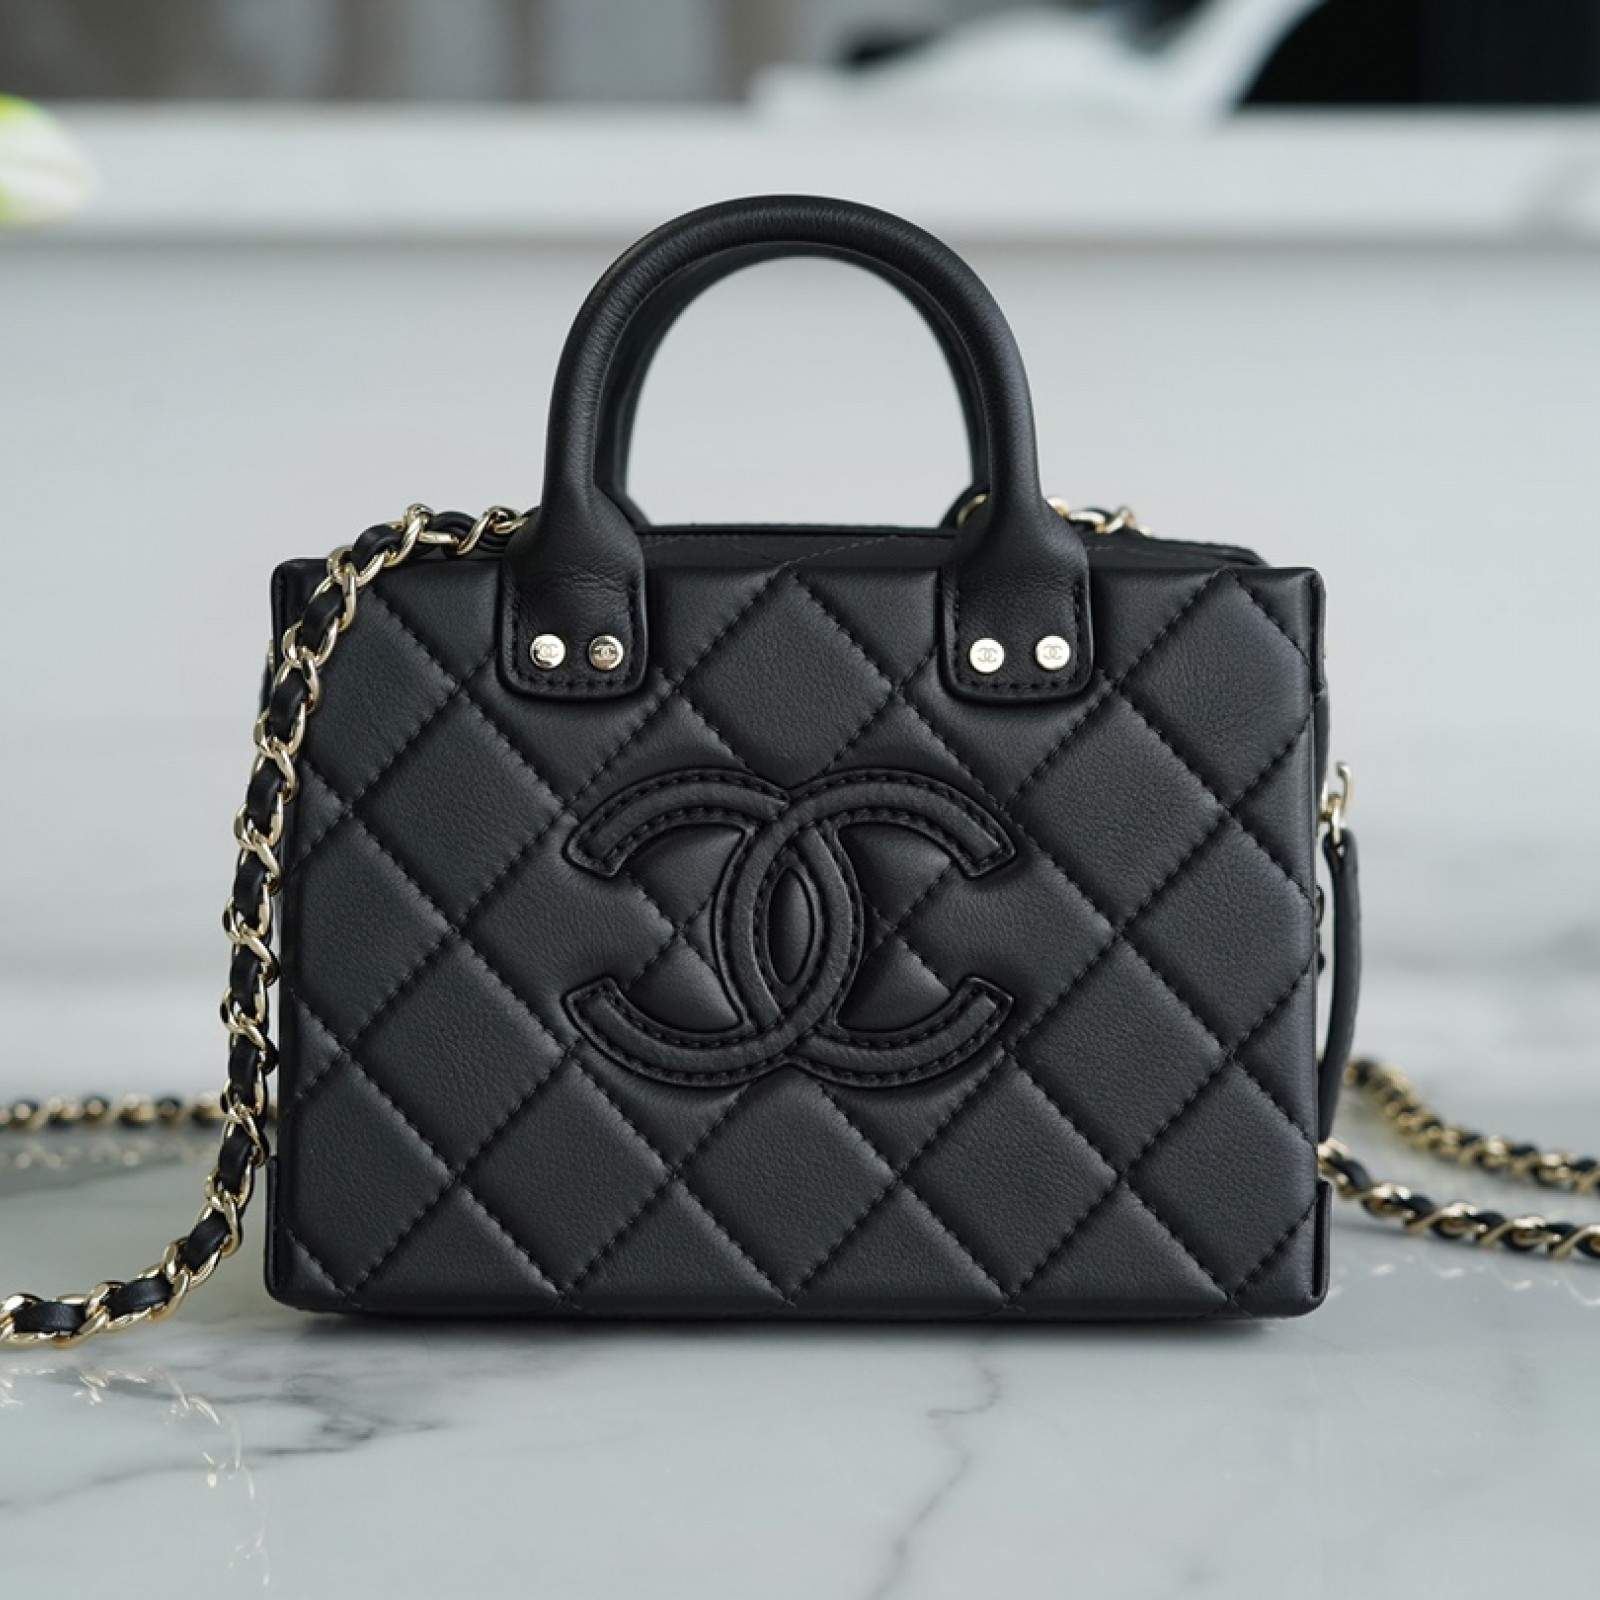 CHANEL SMALL STUDDED SQUARE VANITY CASE